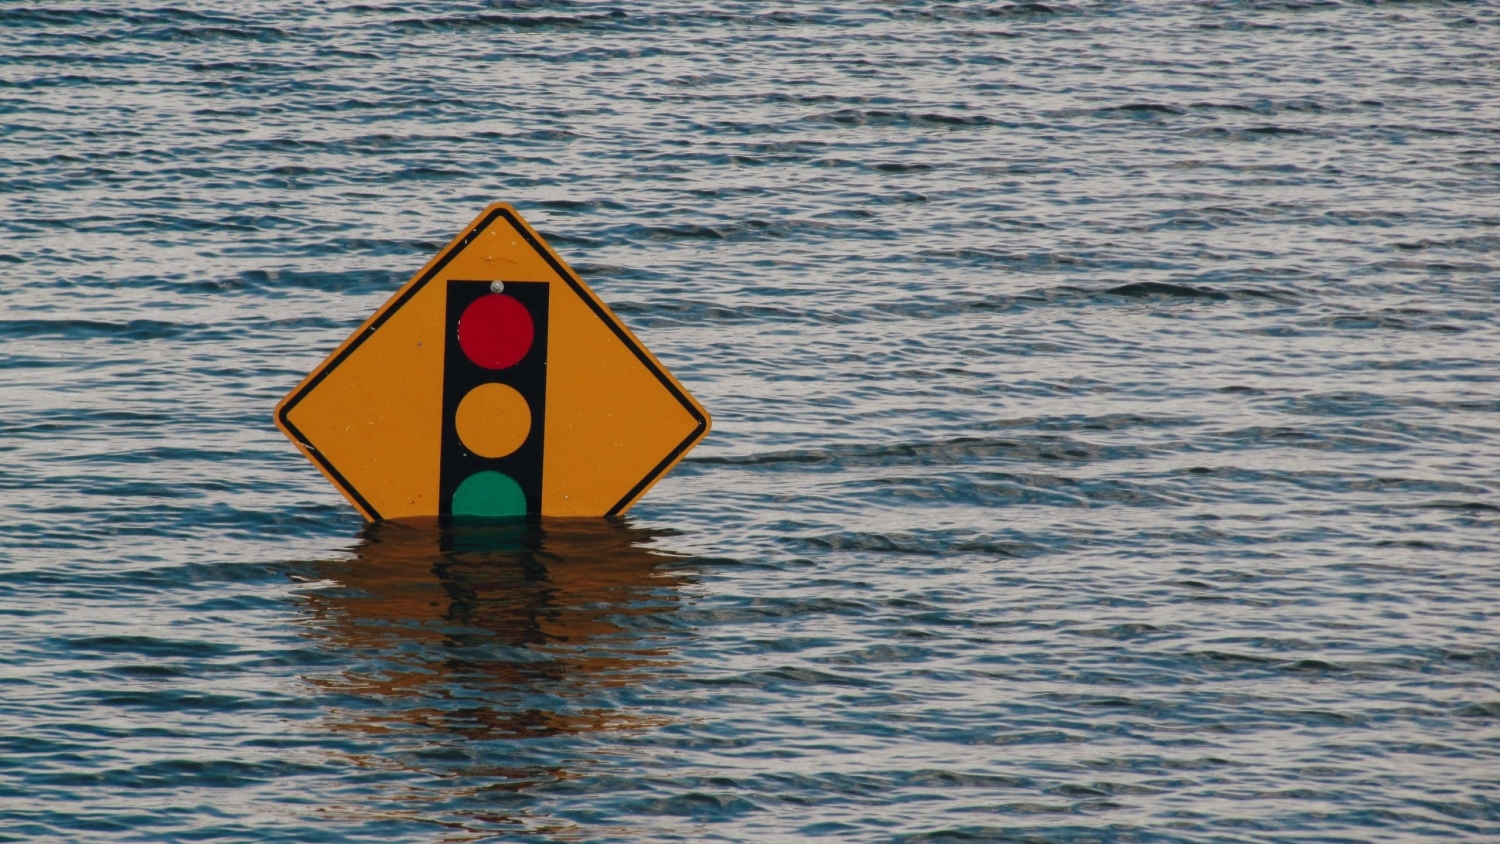 Traffic light sign under water - Gaps Found in Research on ‘Climate Gentrification’ - College of Natural Resources News NC State University